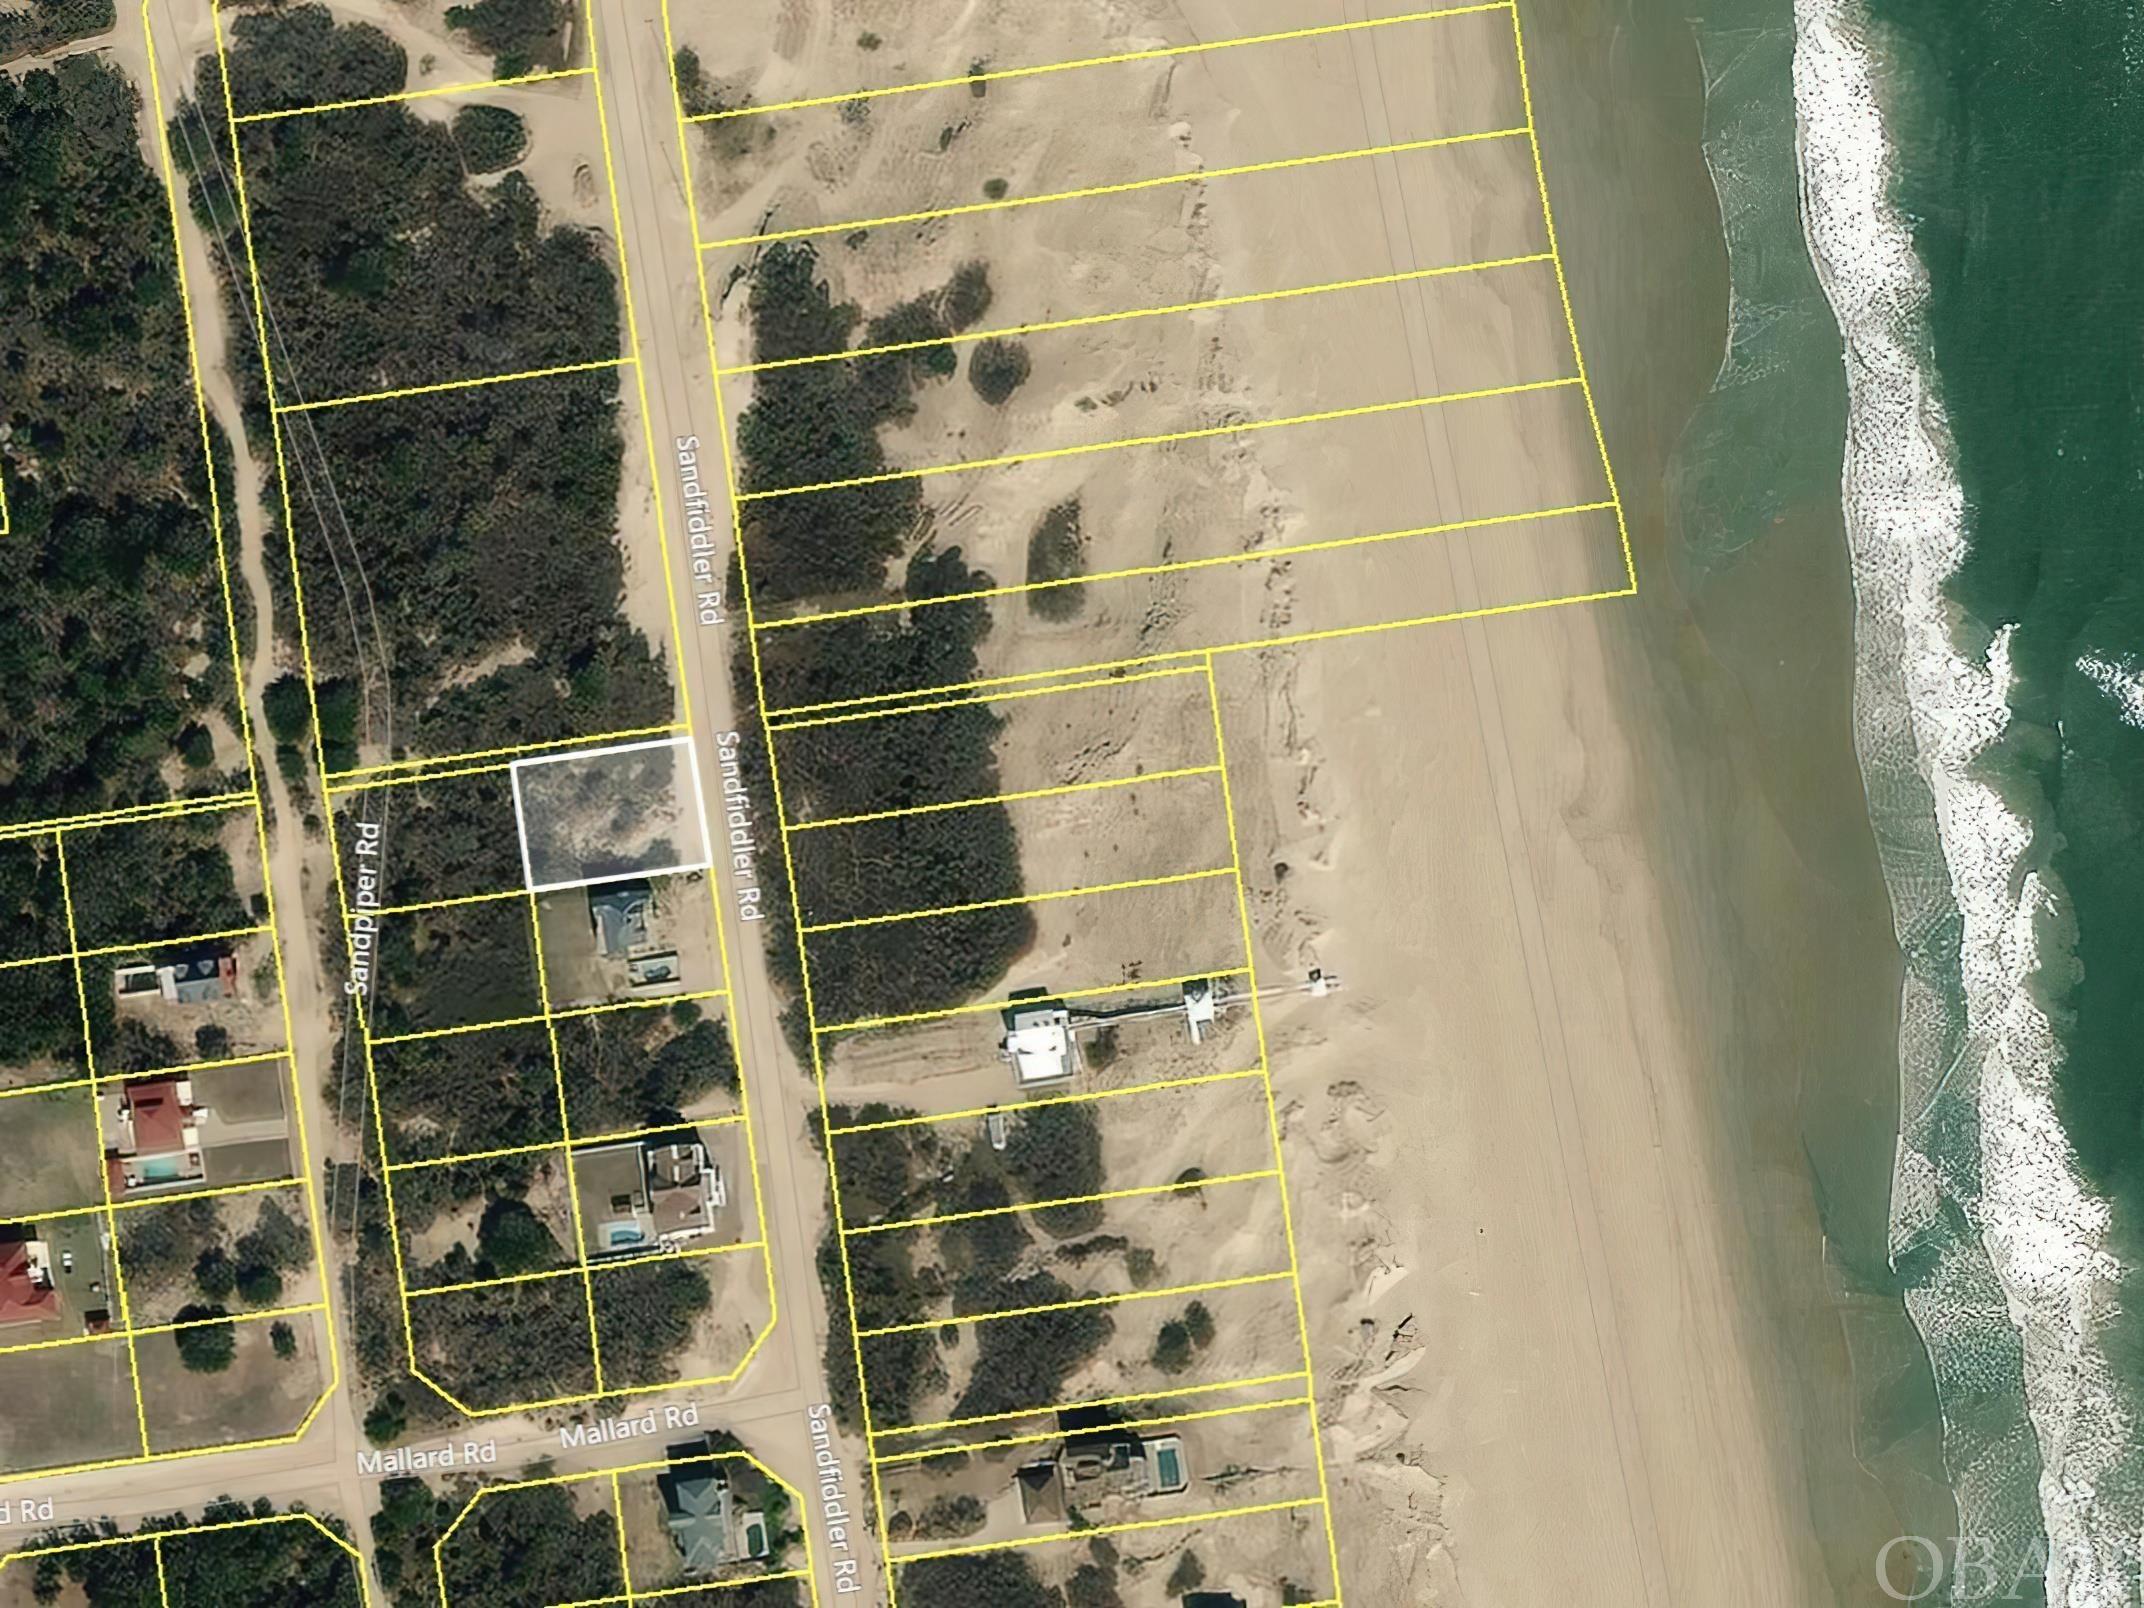 A beautiful Semi-Oceanfront home site in Carova Beach that doesn't have a lot of houses in front of it. Located near the heart of Carova Beach by the fire station ramp access and with a 10ft easement to the giving you a lager buffer from your neighbor to the north. Walk to the beach, or hop in you ATV and scoot on over to the park This lot has a lot of possibilities. Just pick your plans, build your house, and enjoy the views!  Between the Dolphins swimming in the ocean, the pelicans gliding through the air, and the Corolla Wild Horses grazing on the Dunes what's not to love about Carova Beach.